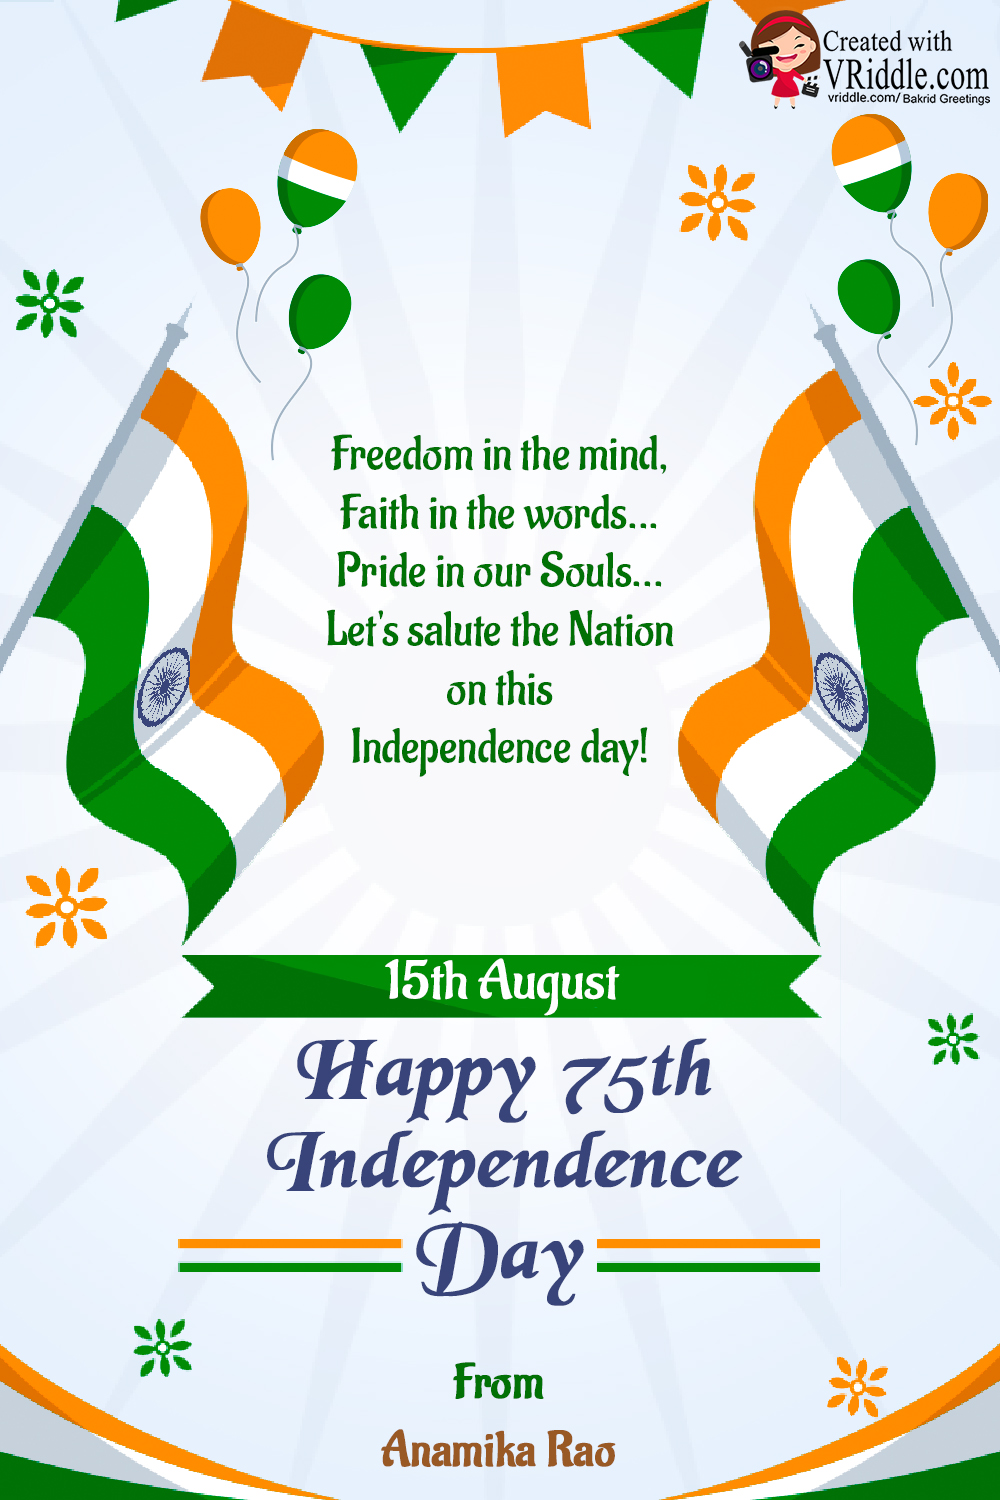 75th Independence Day Greeting Card With Indian Flag Vriddle